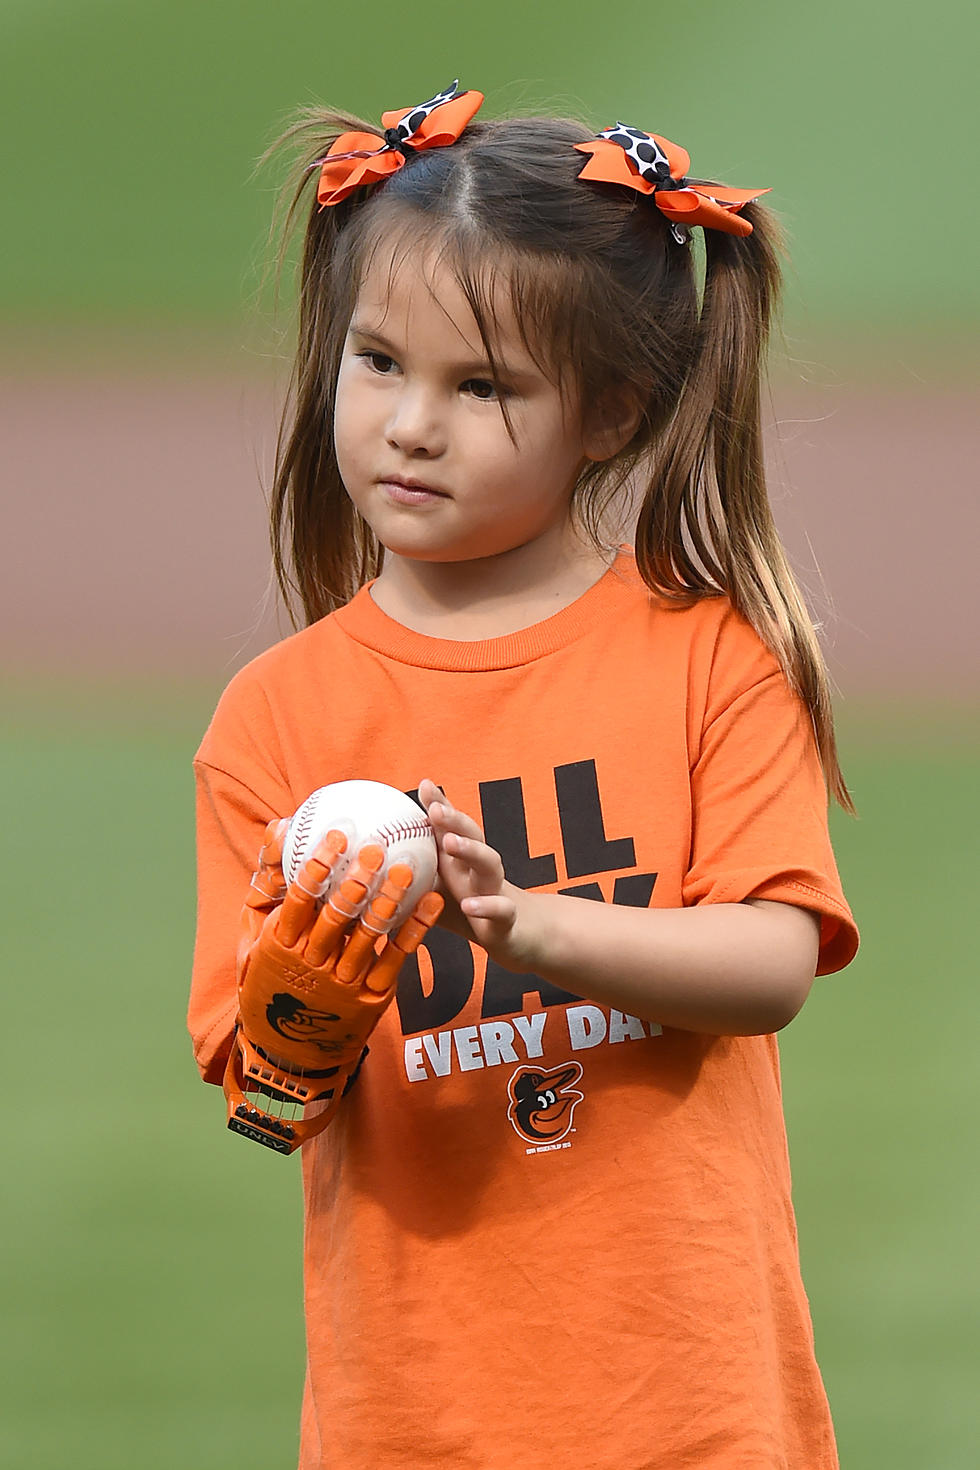 Little Girl With Prosthetic Hand Throws Out First Pitch at MLB Game